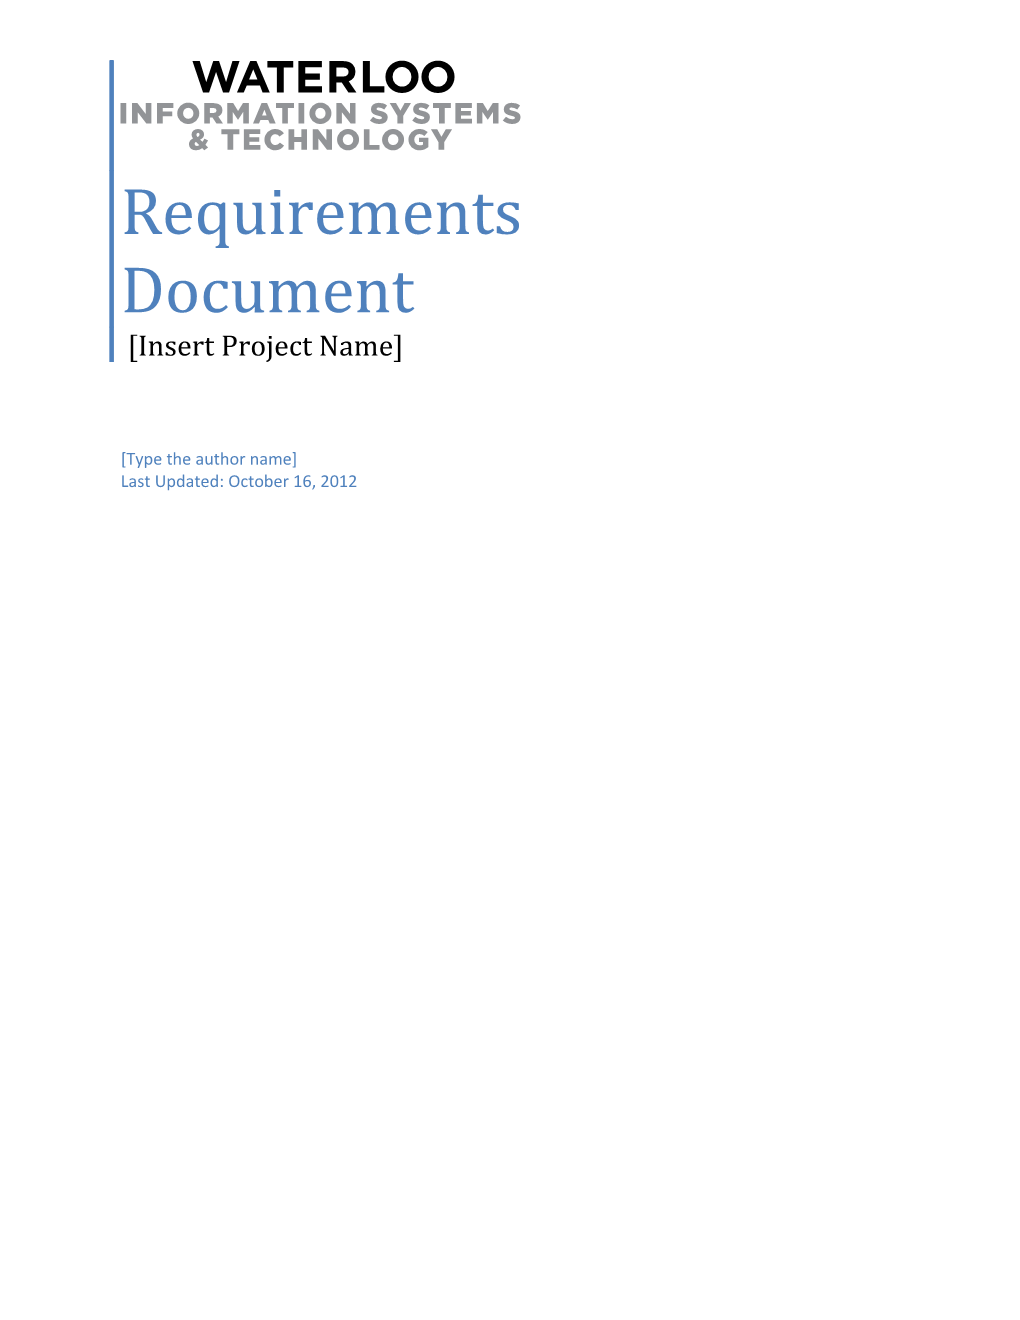 Requirements Document Insert Project Name